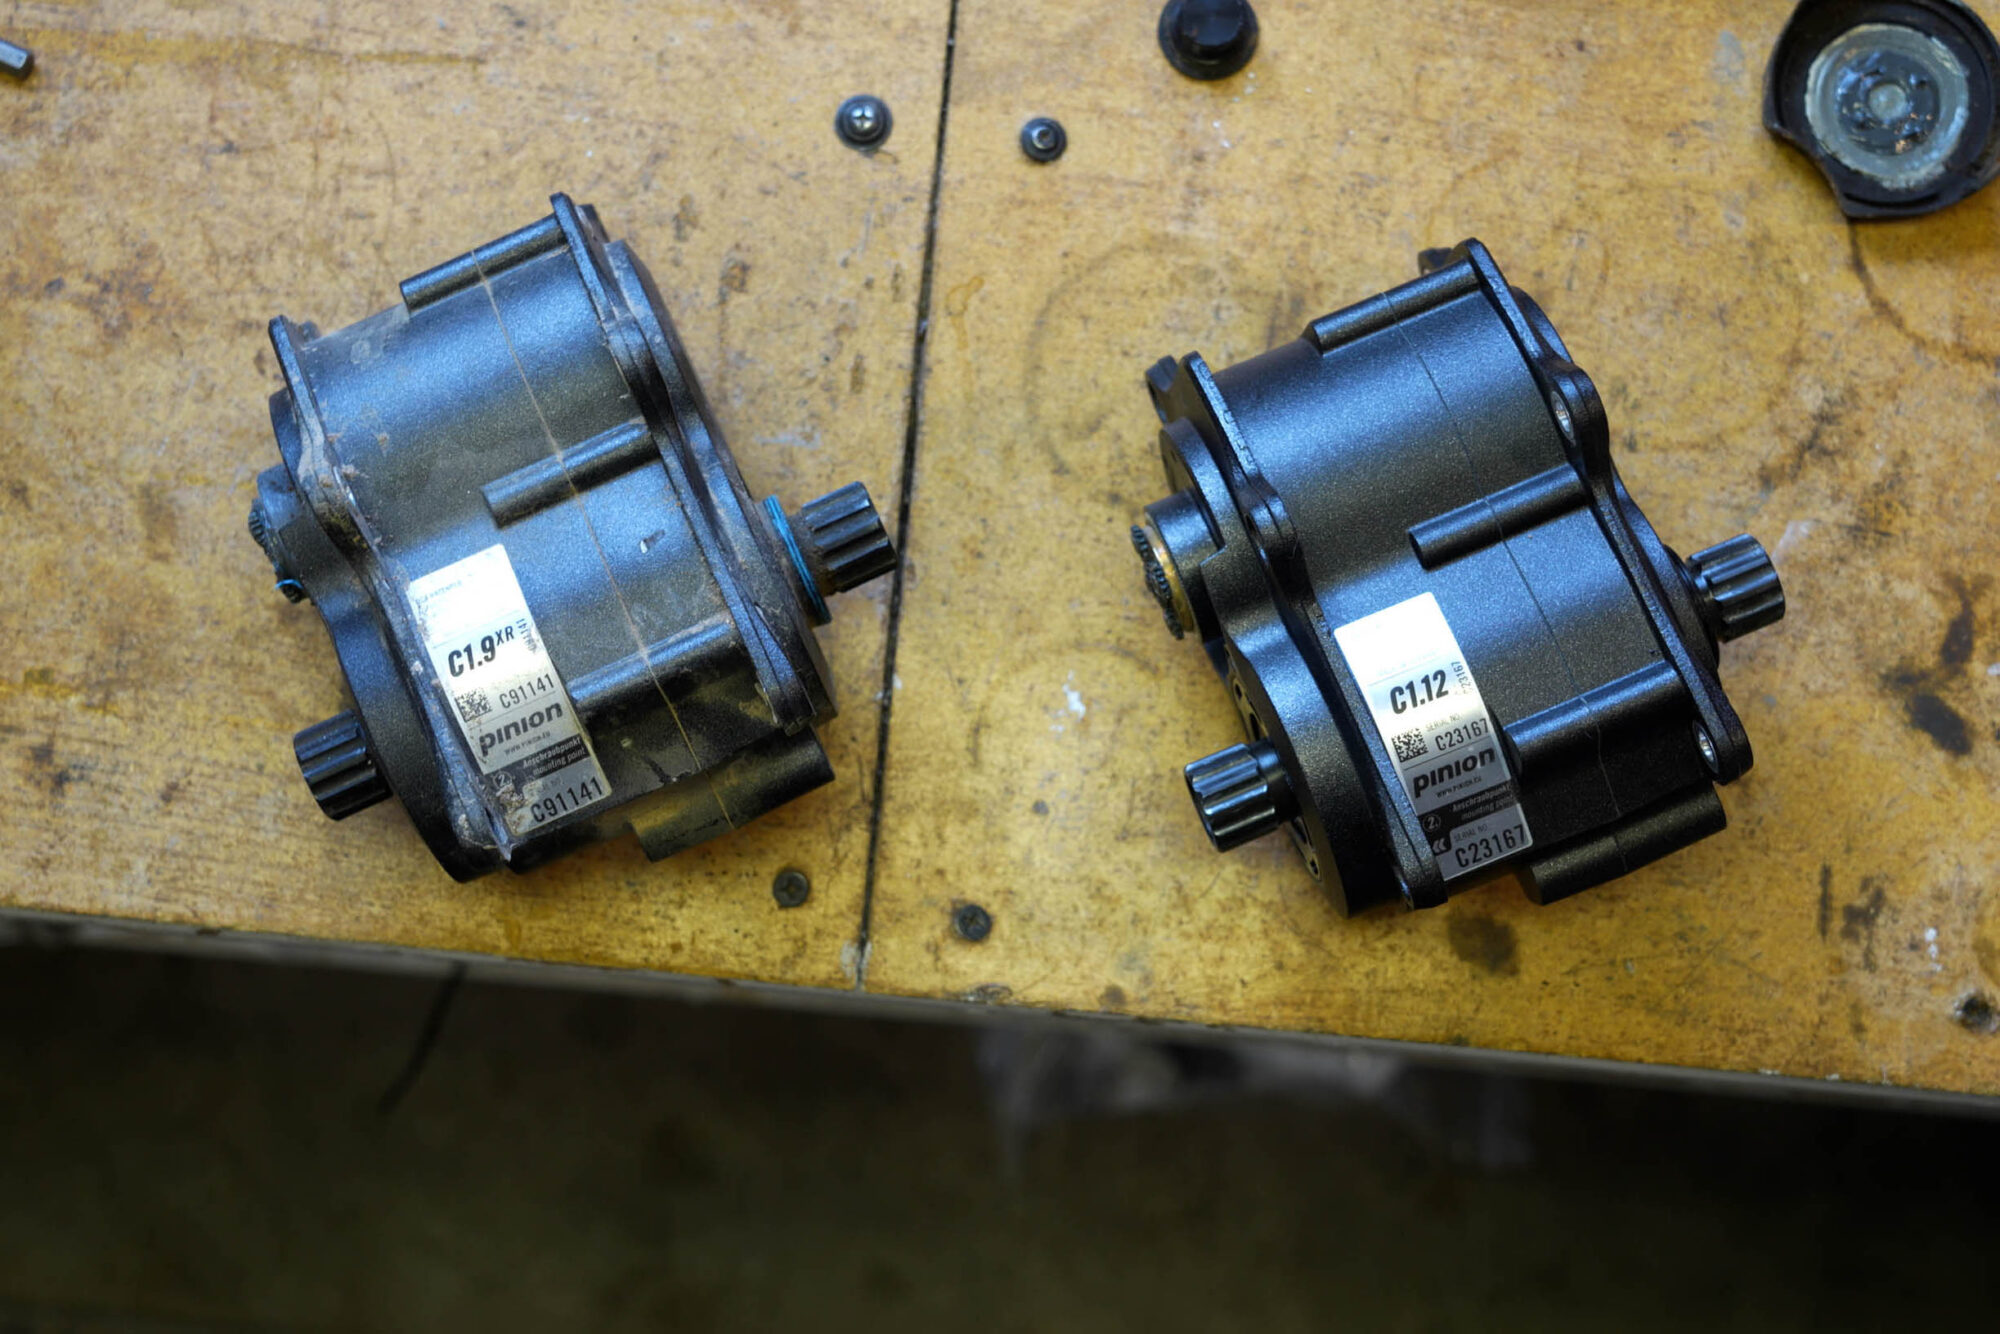 Pinion Gearbox Review